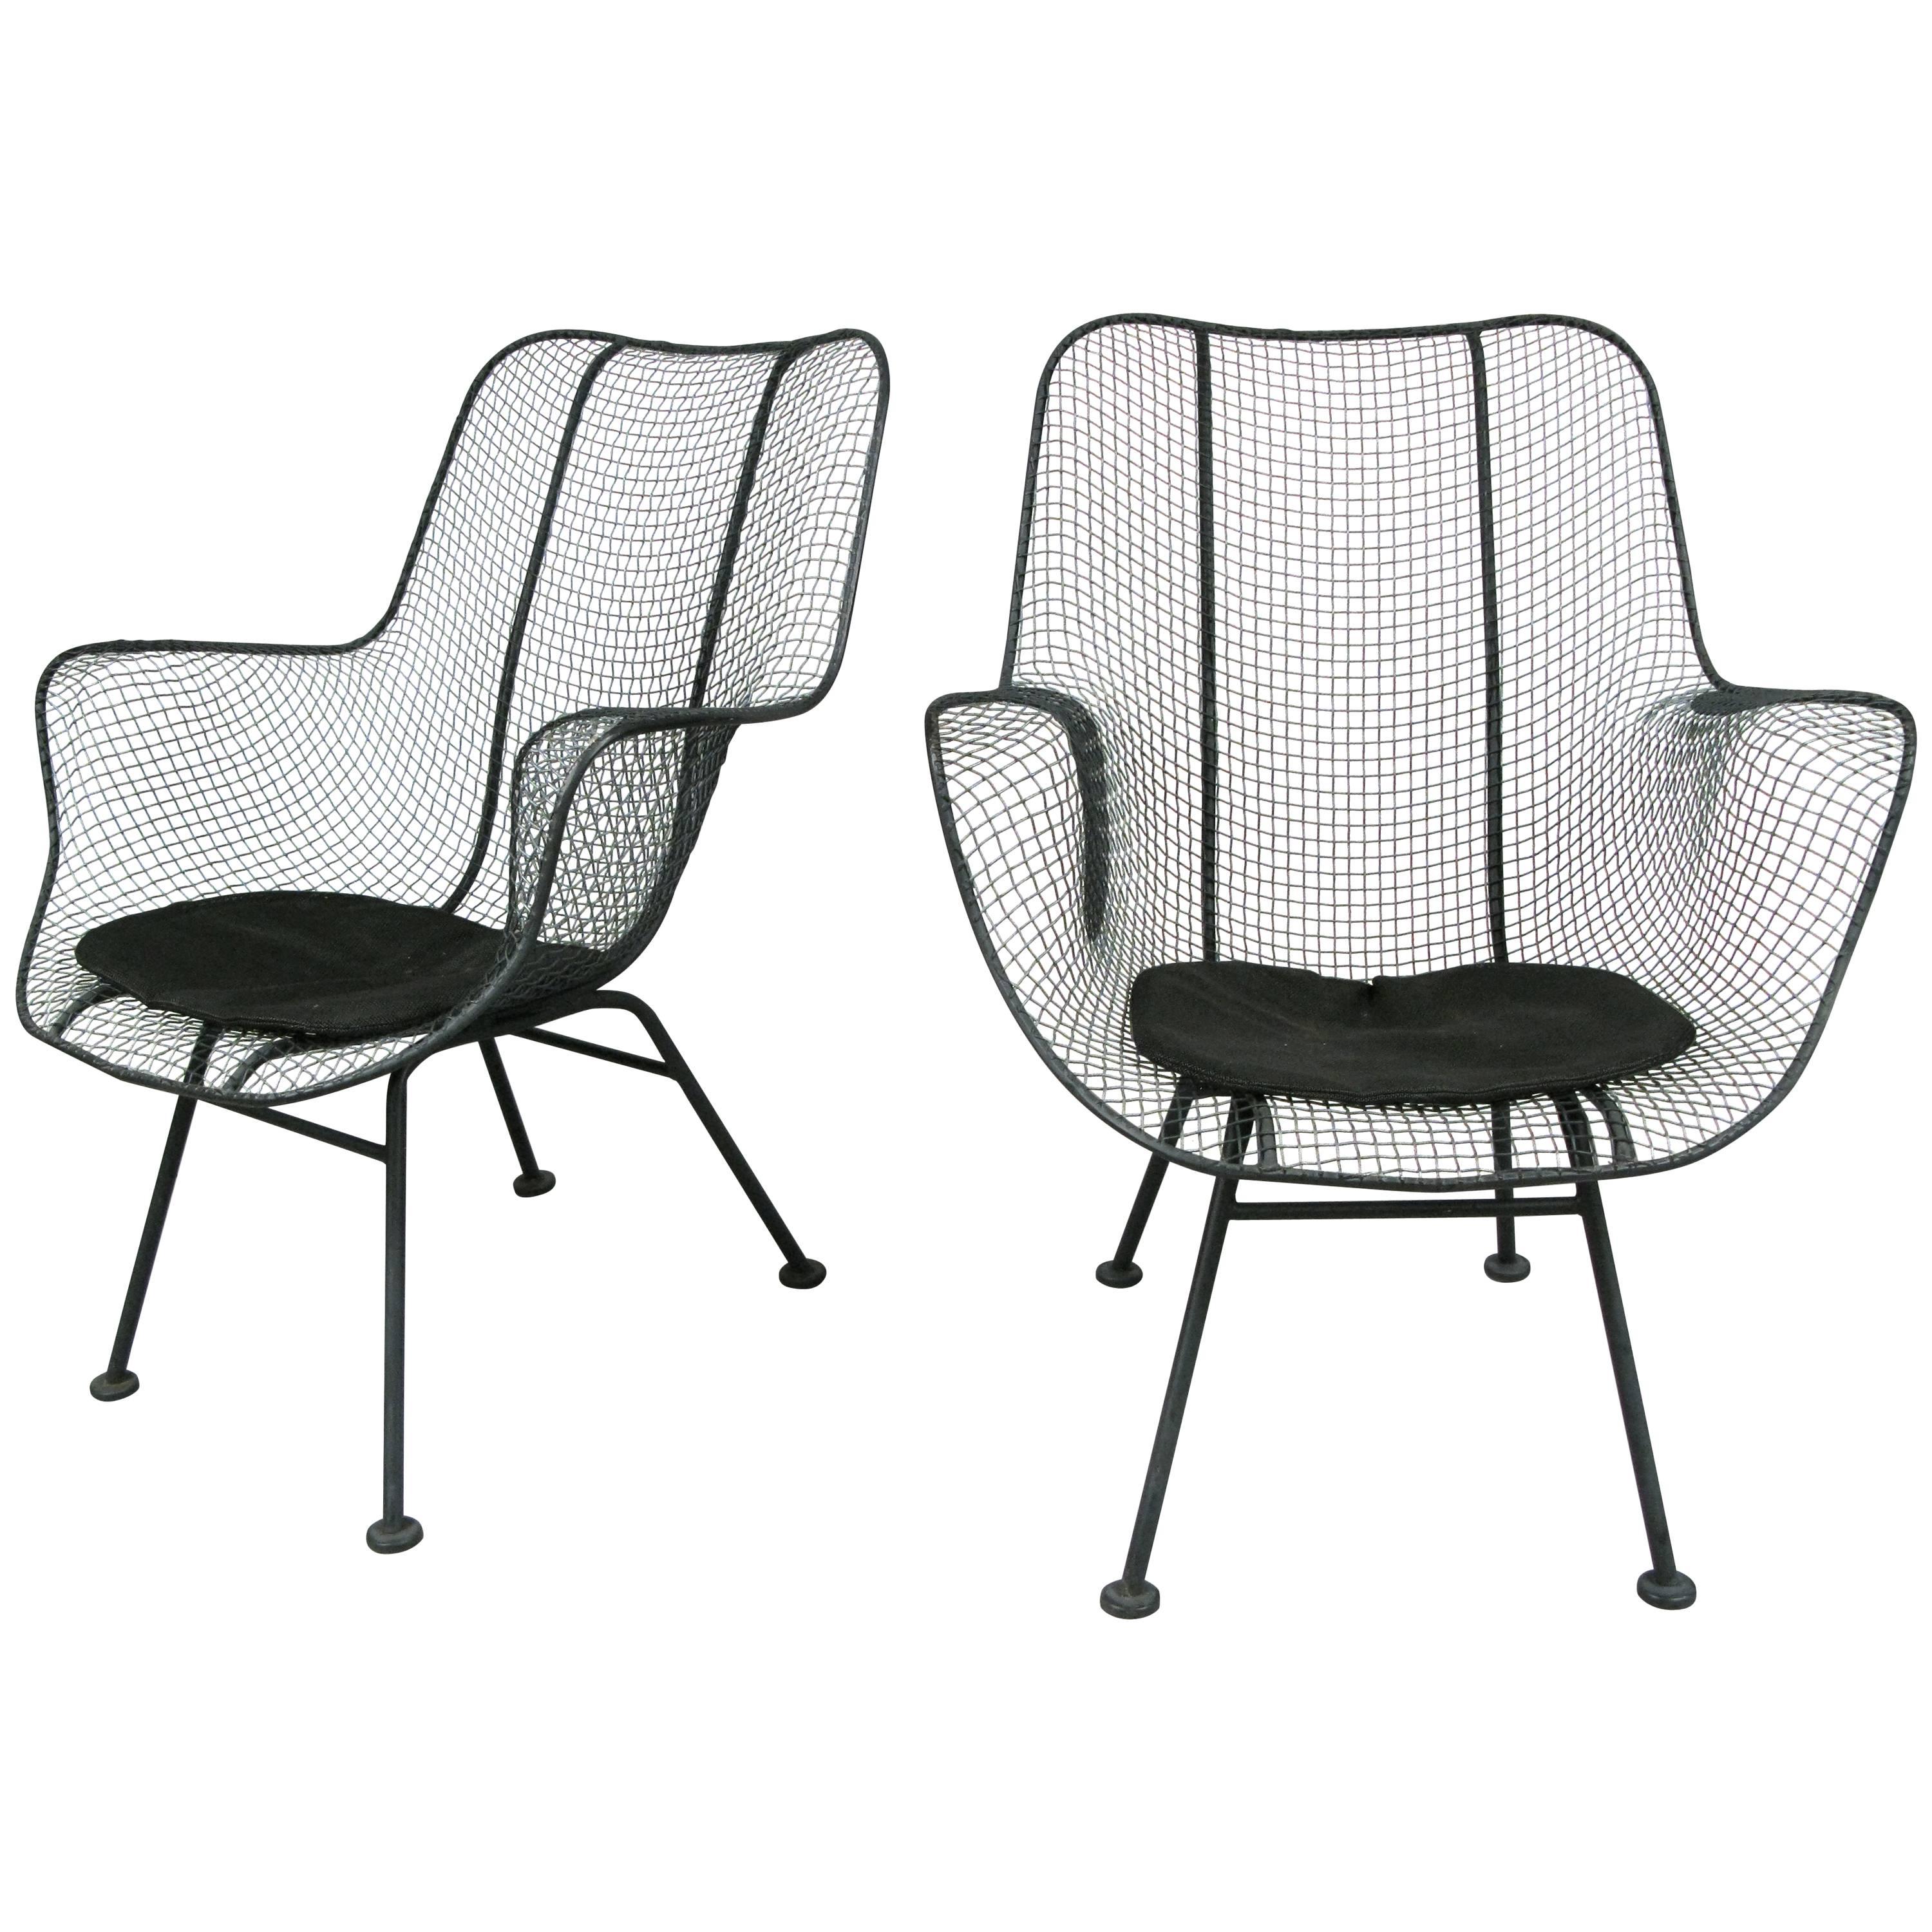 Pair of Vintage High Back Lounge Chairs by Russell Woodard